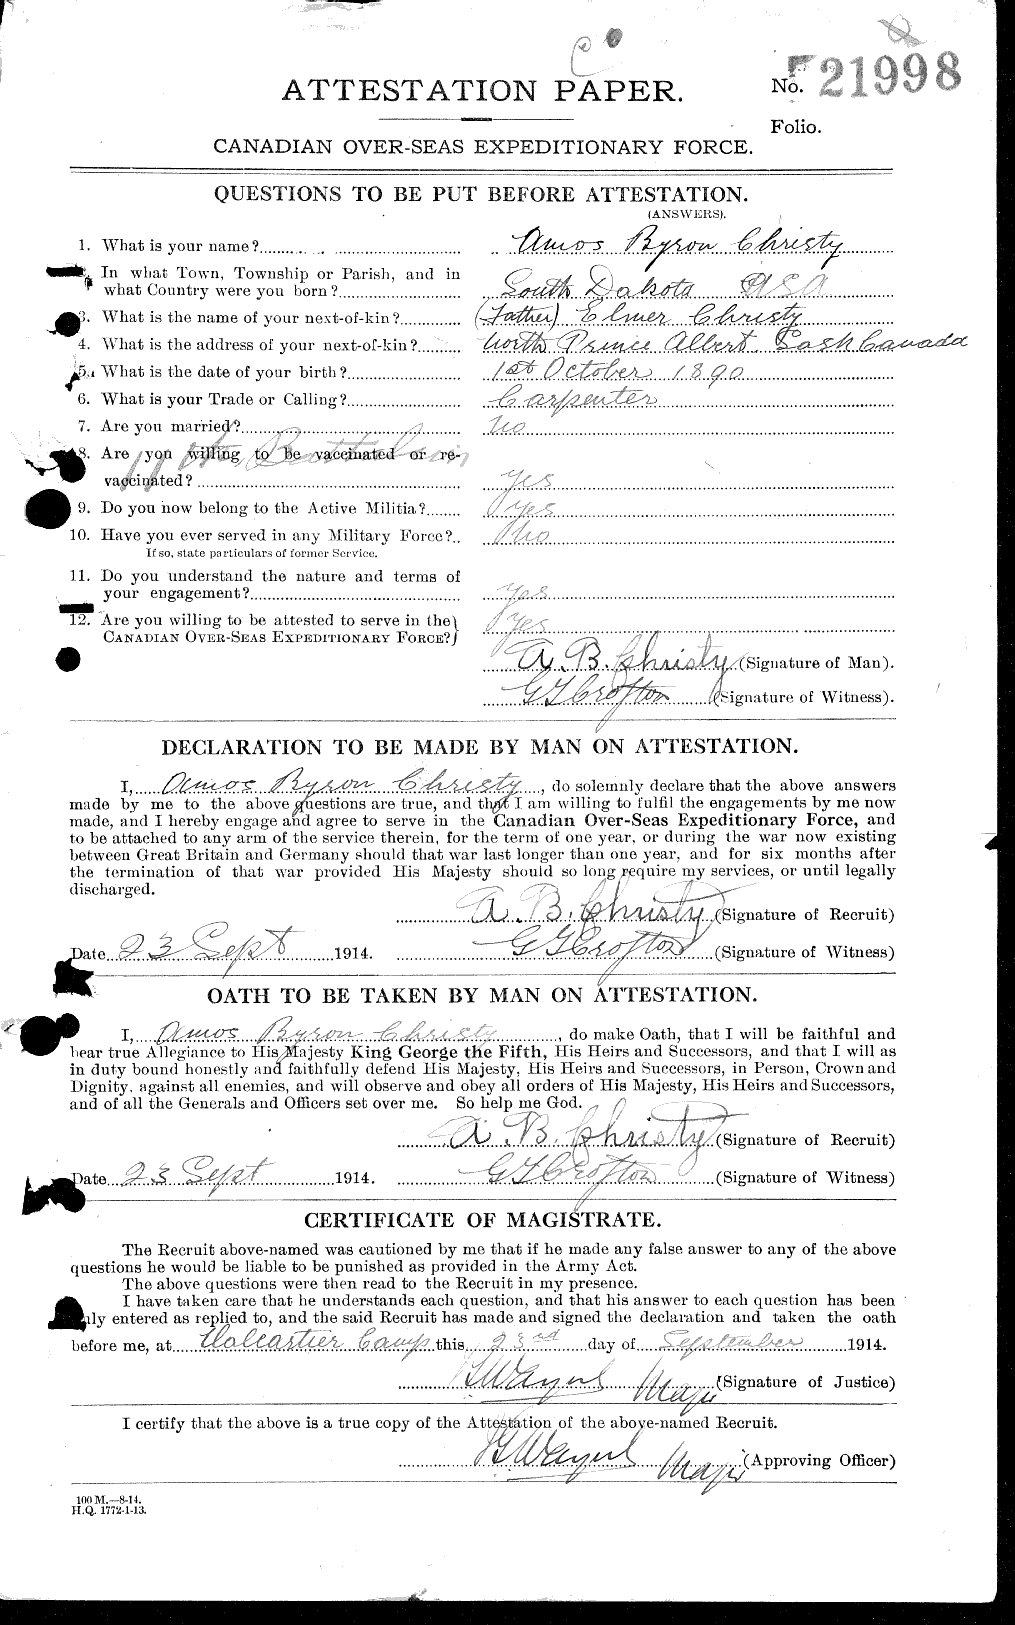 Personnel Records of the First World War - CEF 021870a